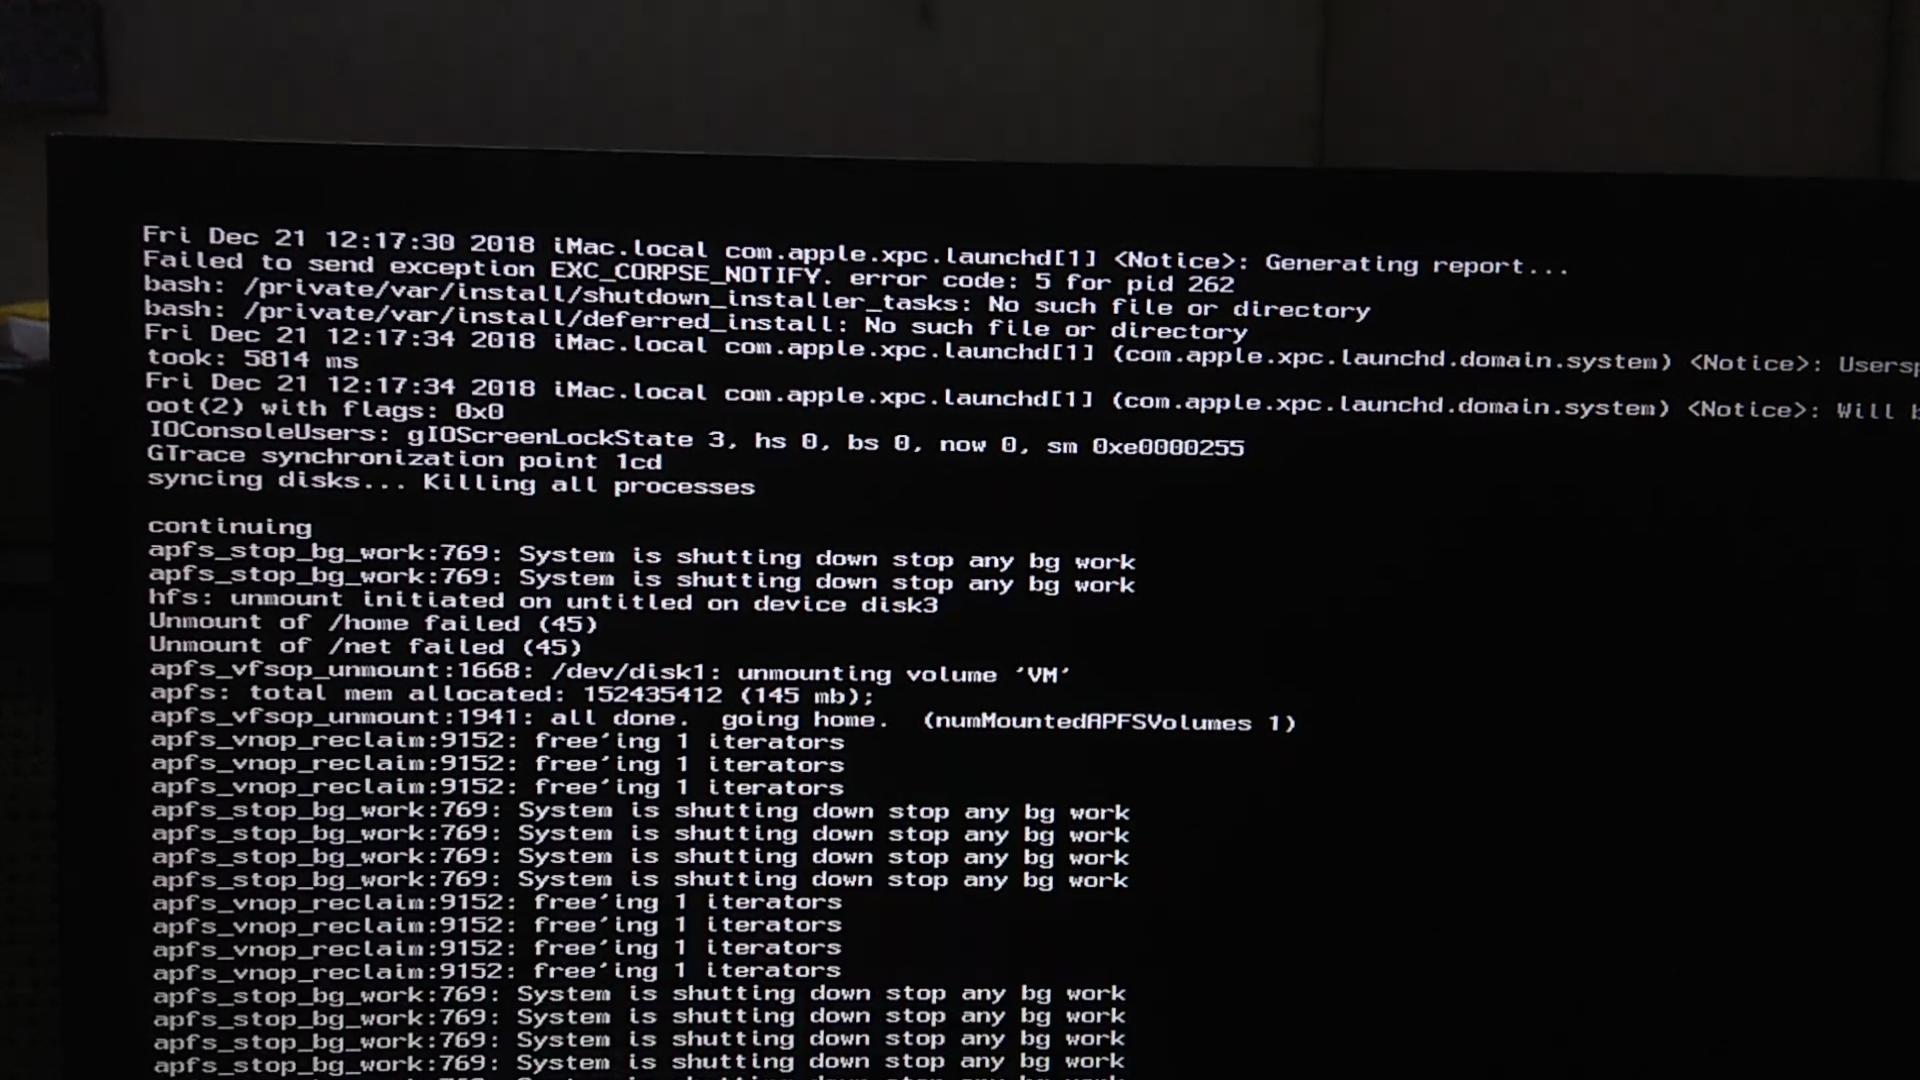 hackintosh failed to send exception exc corpse notify